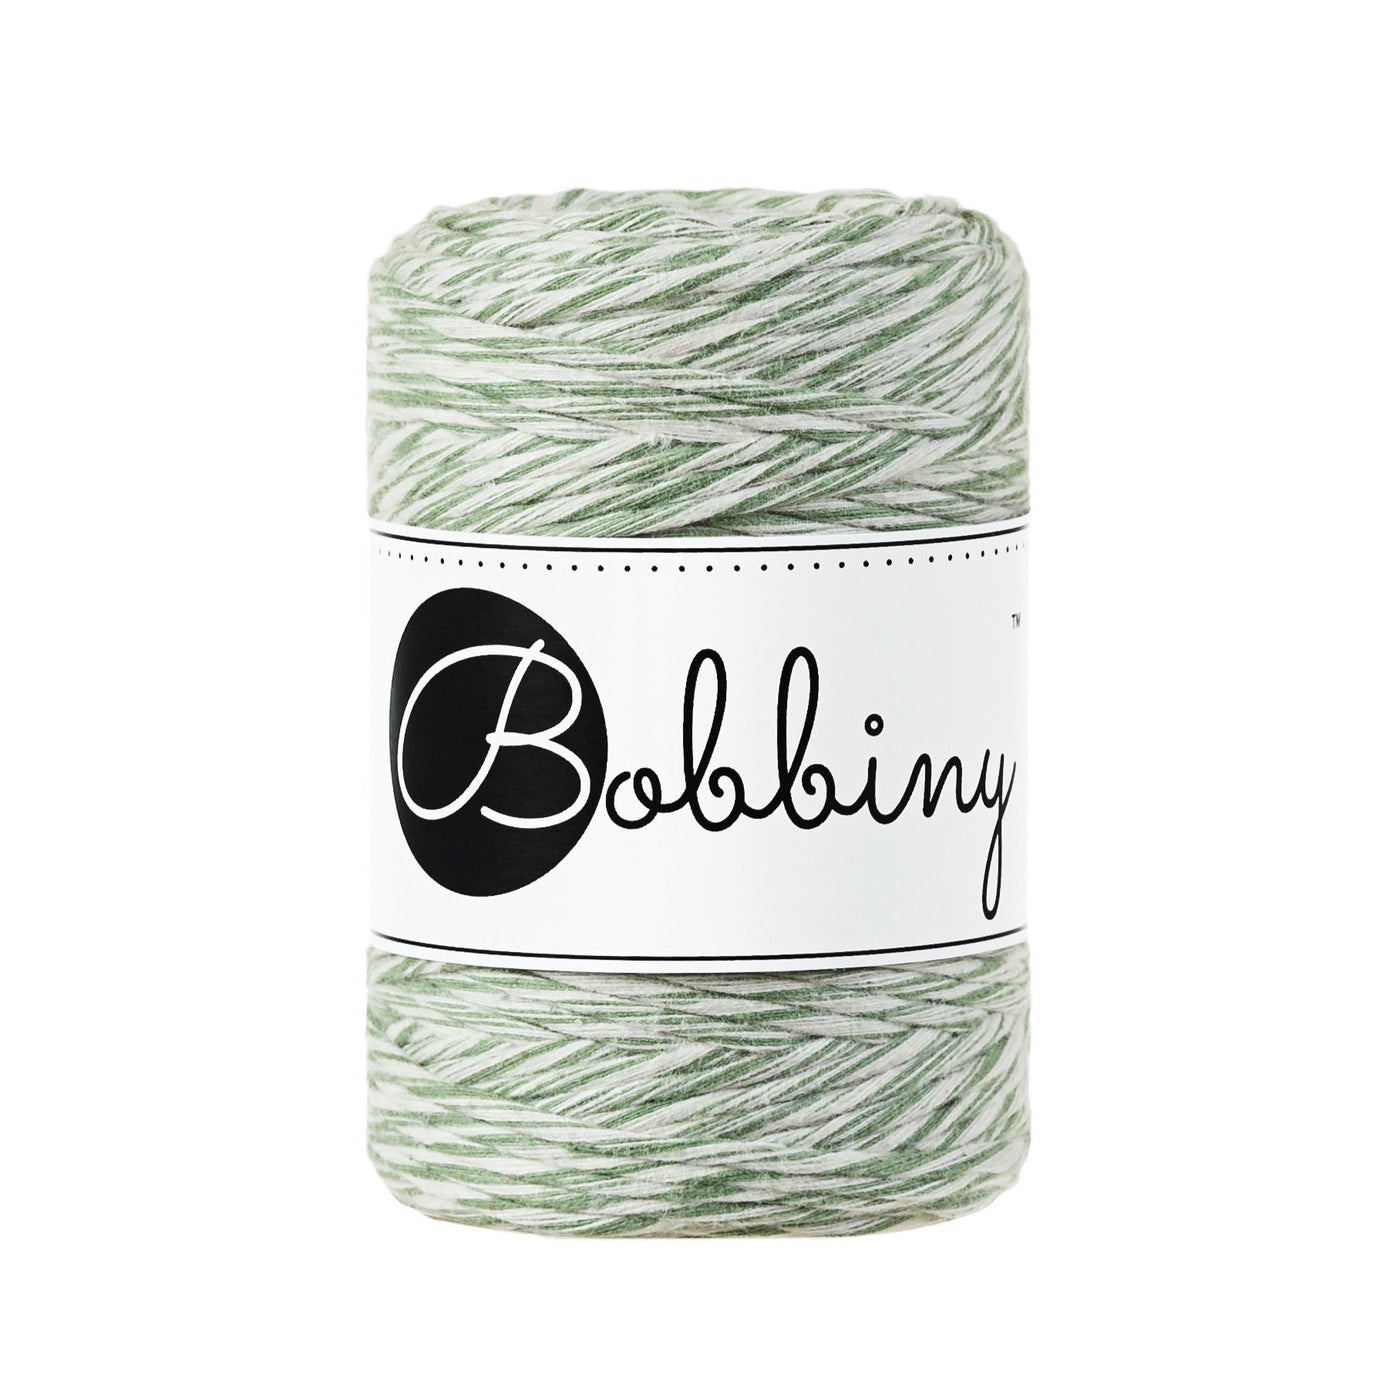 A beautiful mix of the shades EUCALYPTUS & NATURAL, this new addition to the Bobbiny range will make your fibre creations sing!  This super soft cord knots beautifully and makes a wonderful fringe.  Premium Macrame Cord 1.5mm  Length: 108 yards (100m)  Weight: 160gms  ﻿Single Twist  100% recycled cotton  28 Fibres 